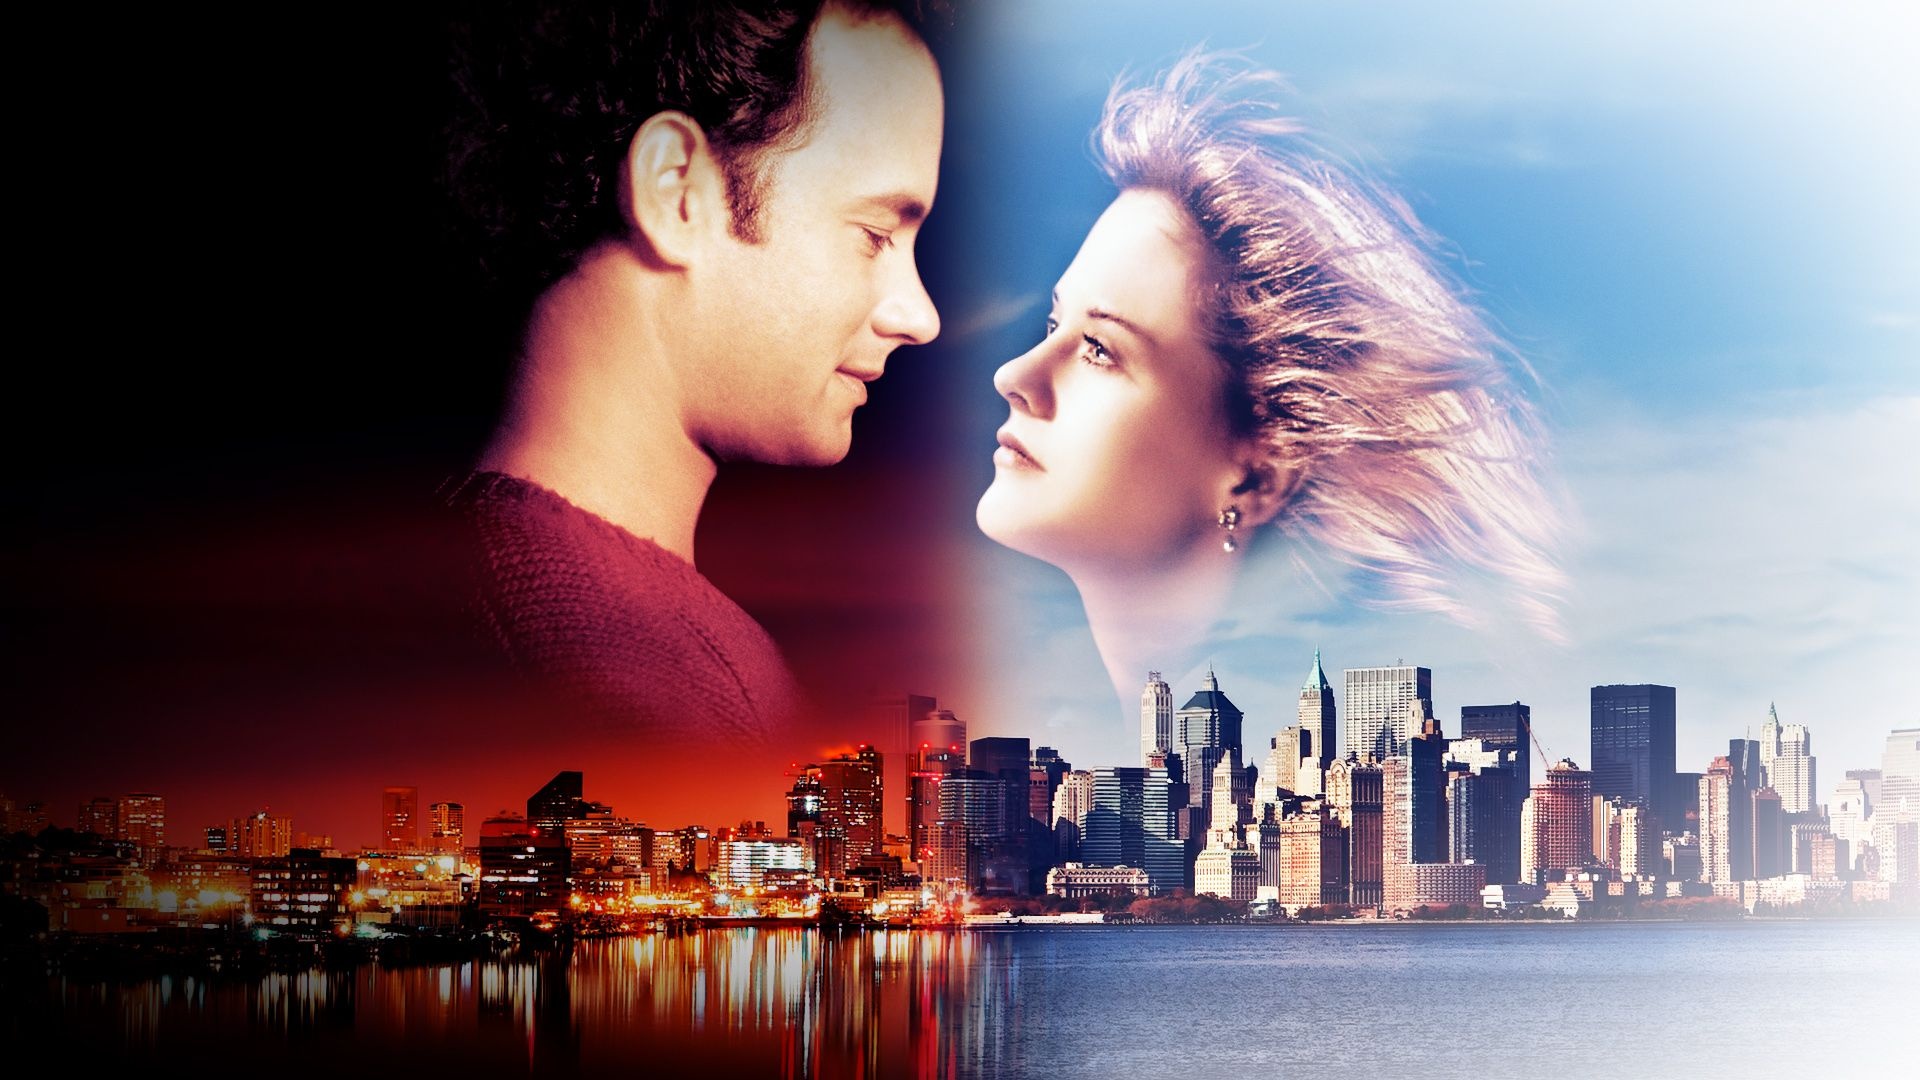 Sleepless in Seattle, Romantic comedy, Love across the country, Serendipitous encounter, 1920x1080 Full HD Desktop